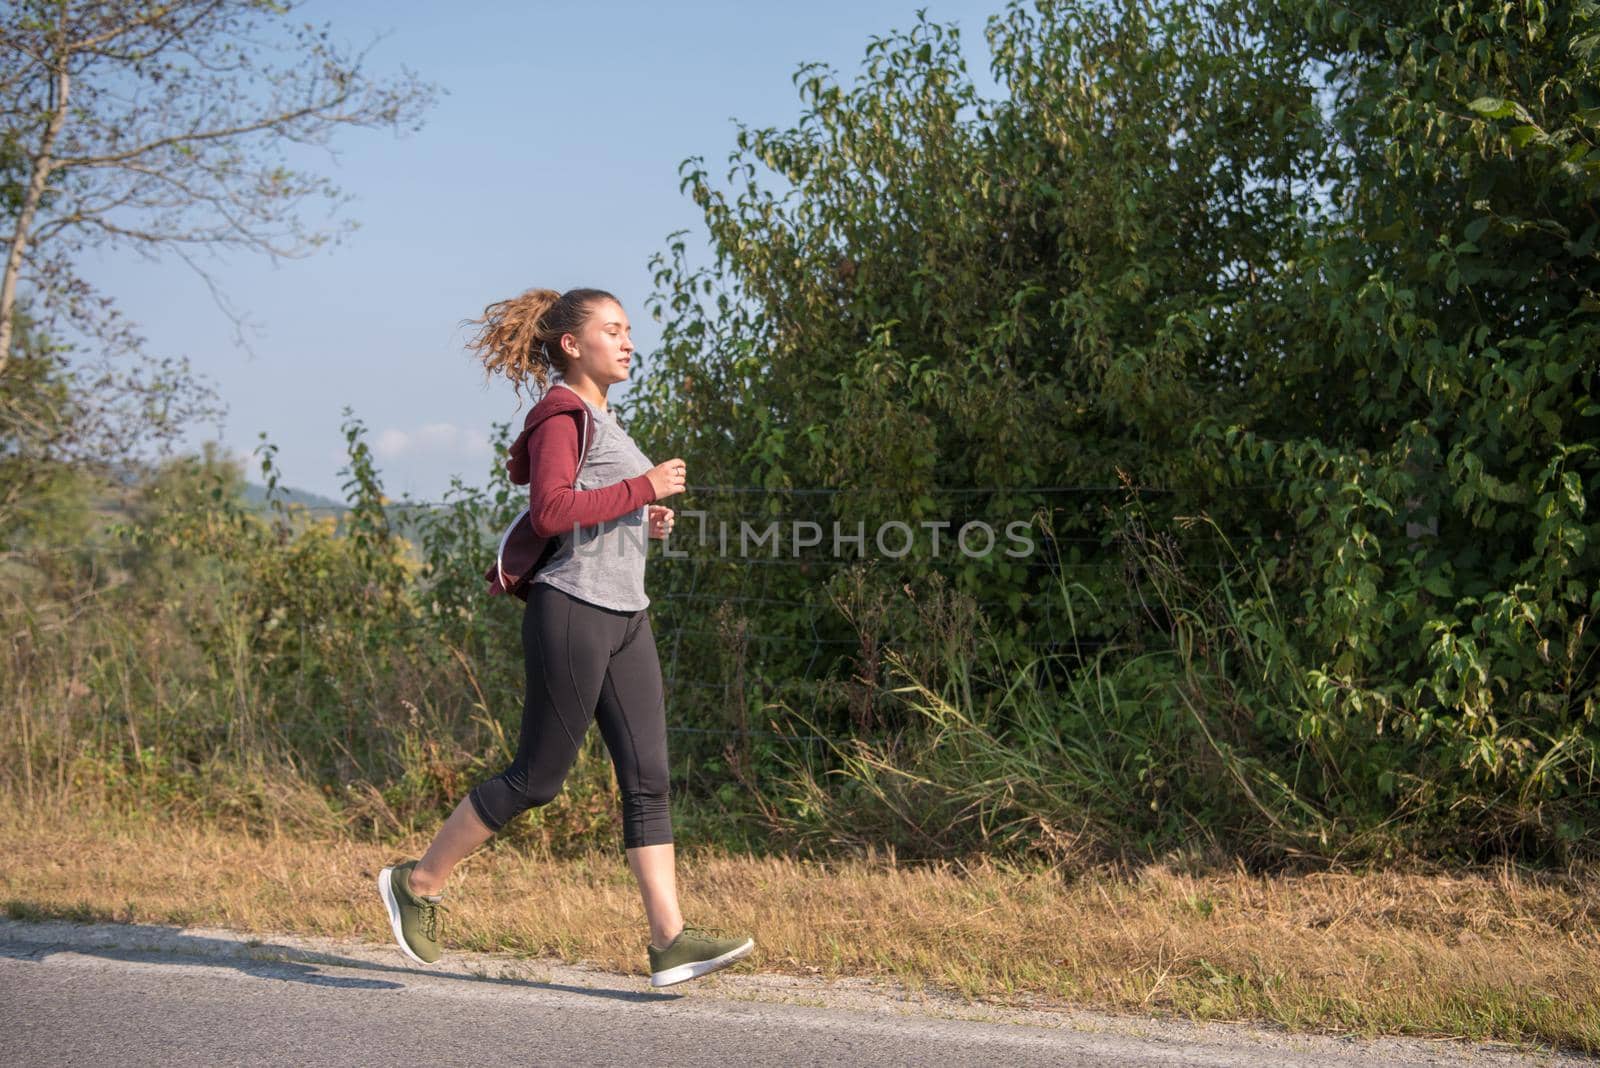 young woman enjoying in a healthy lifestyle while jogging along a country road, exercise and fitness concept